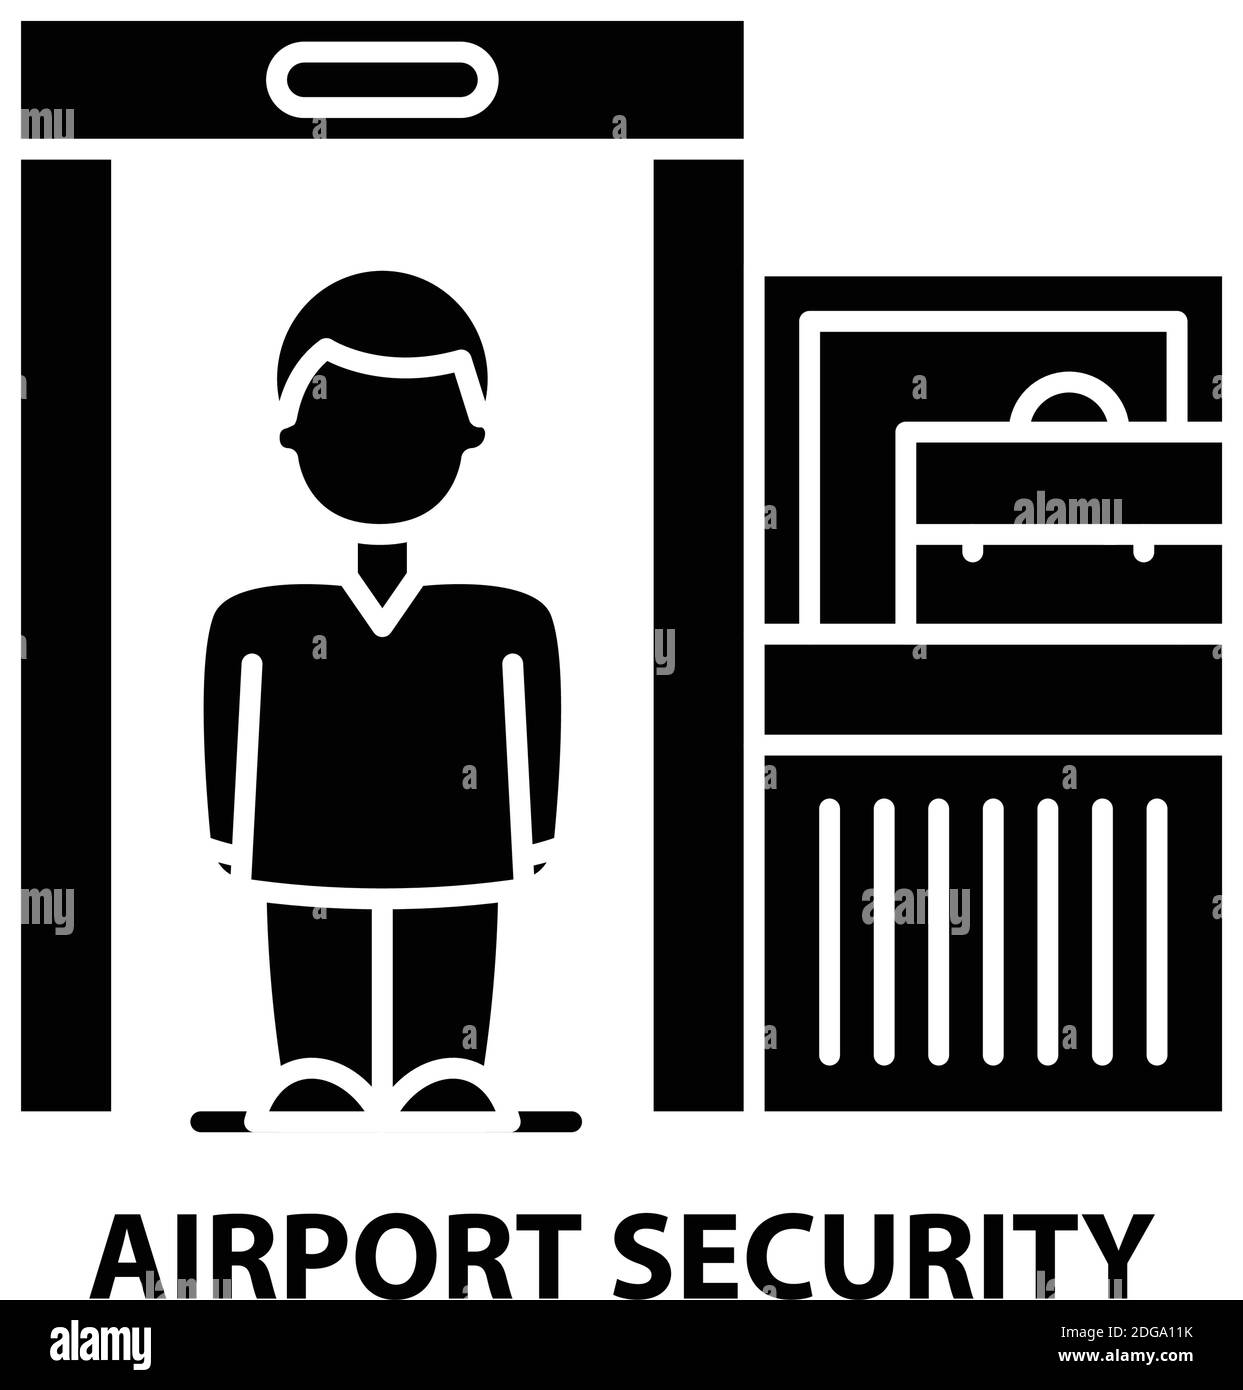 airport security icon, black vector sign with editable strokes, concept illustration Stock Vector